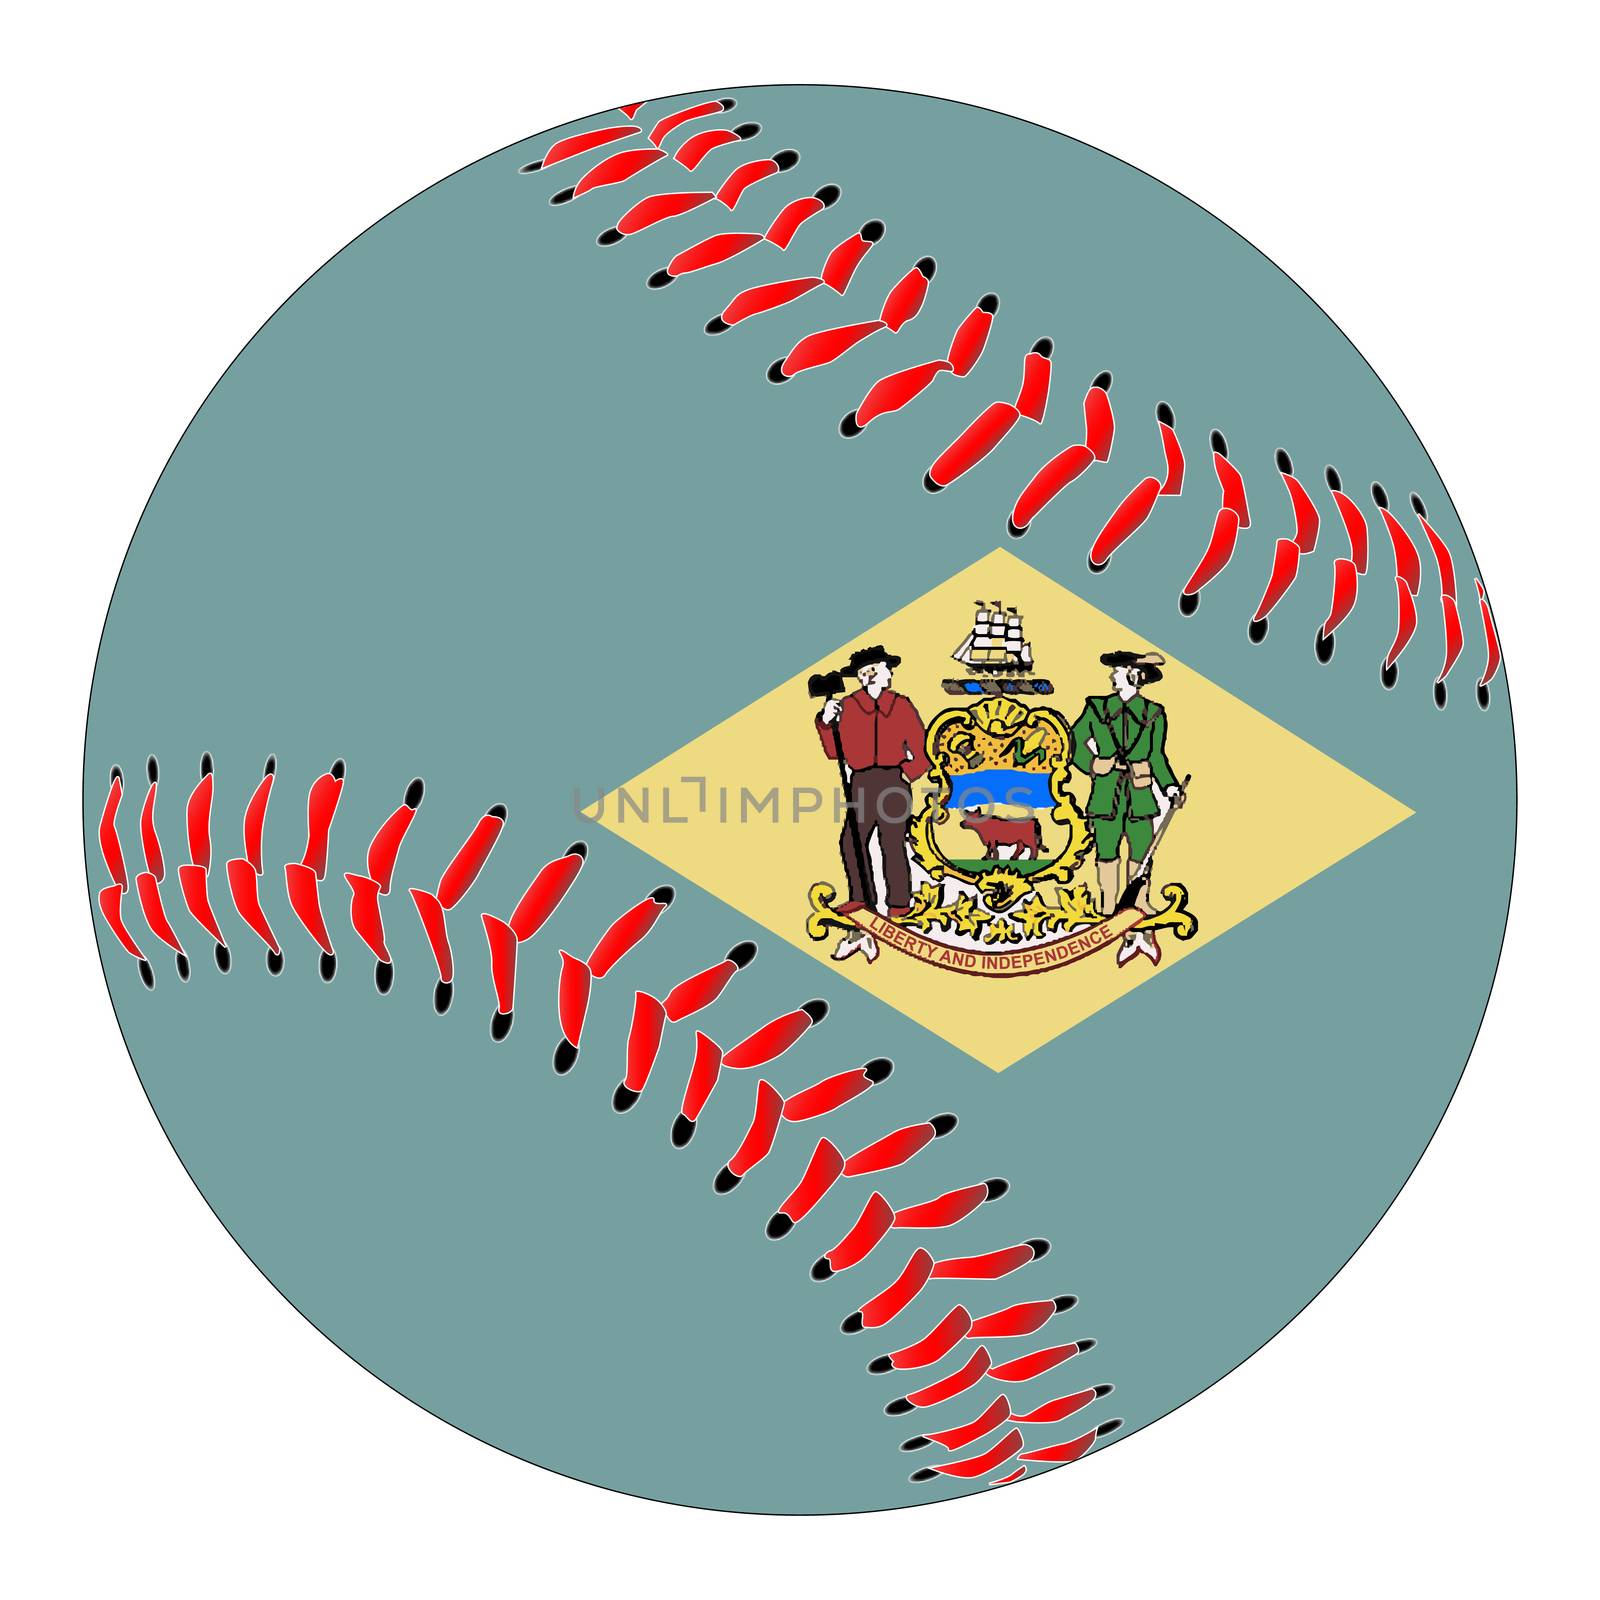 A new white baseball with red stitching with the Delaware state flag overlay isolated on white